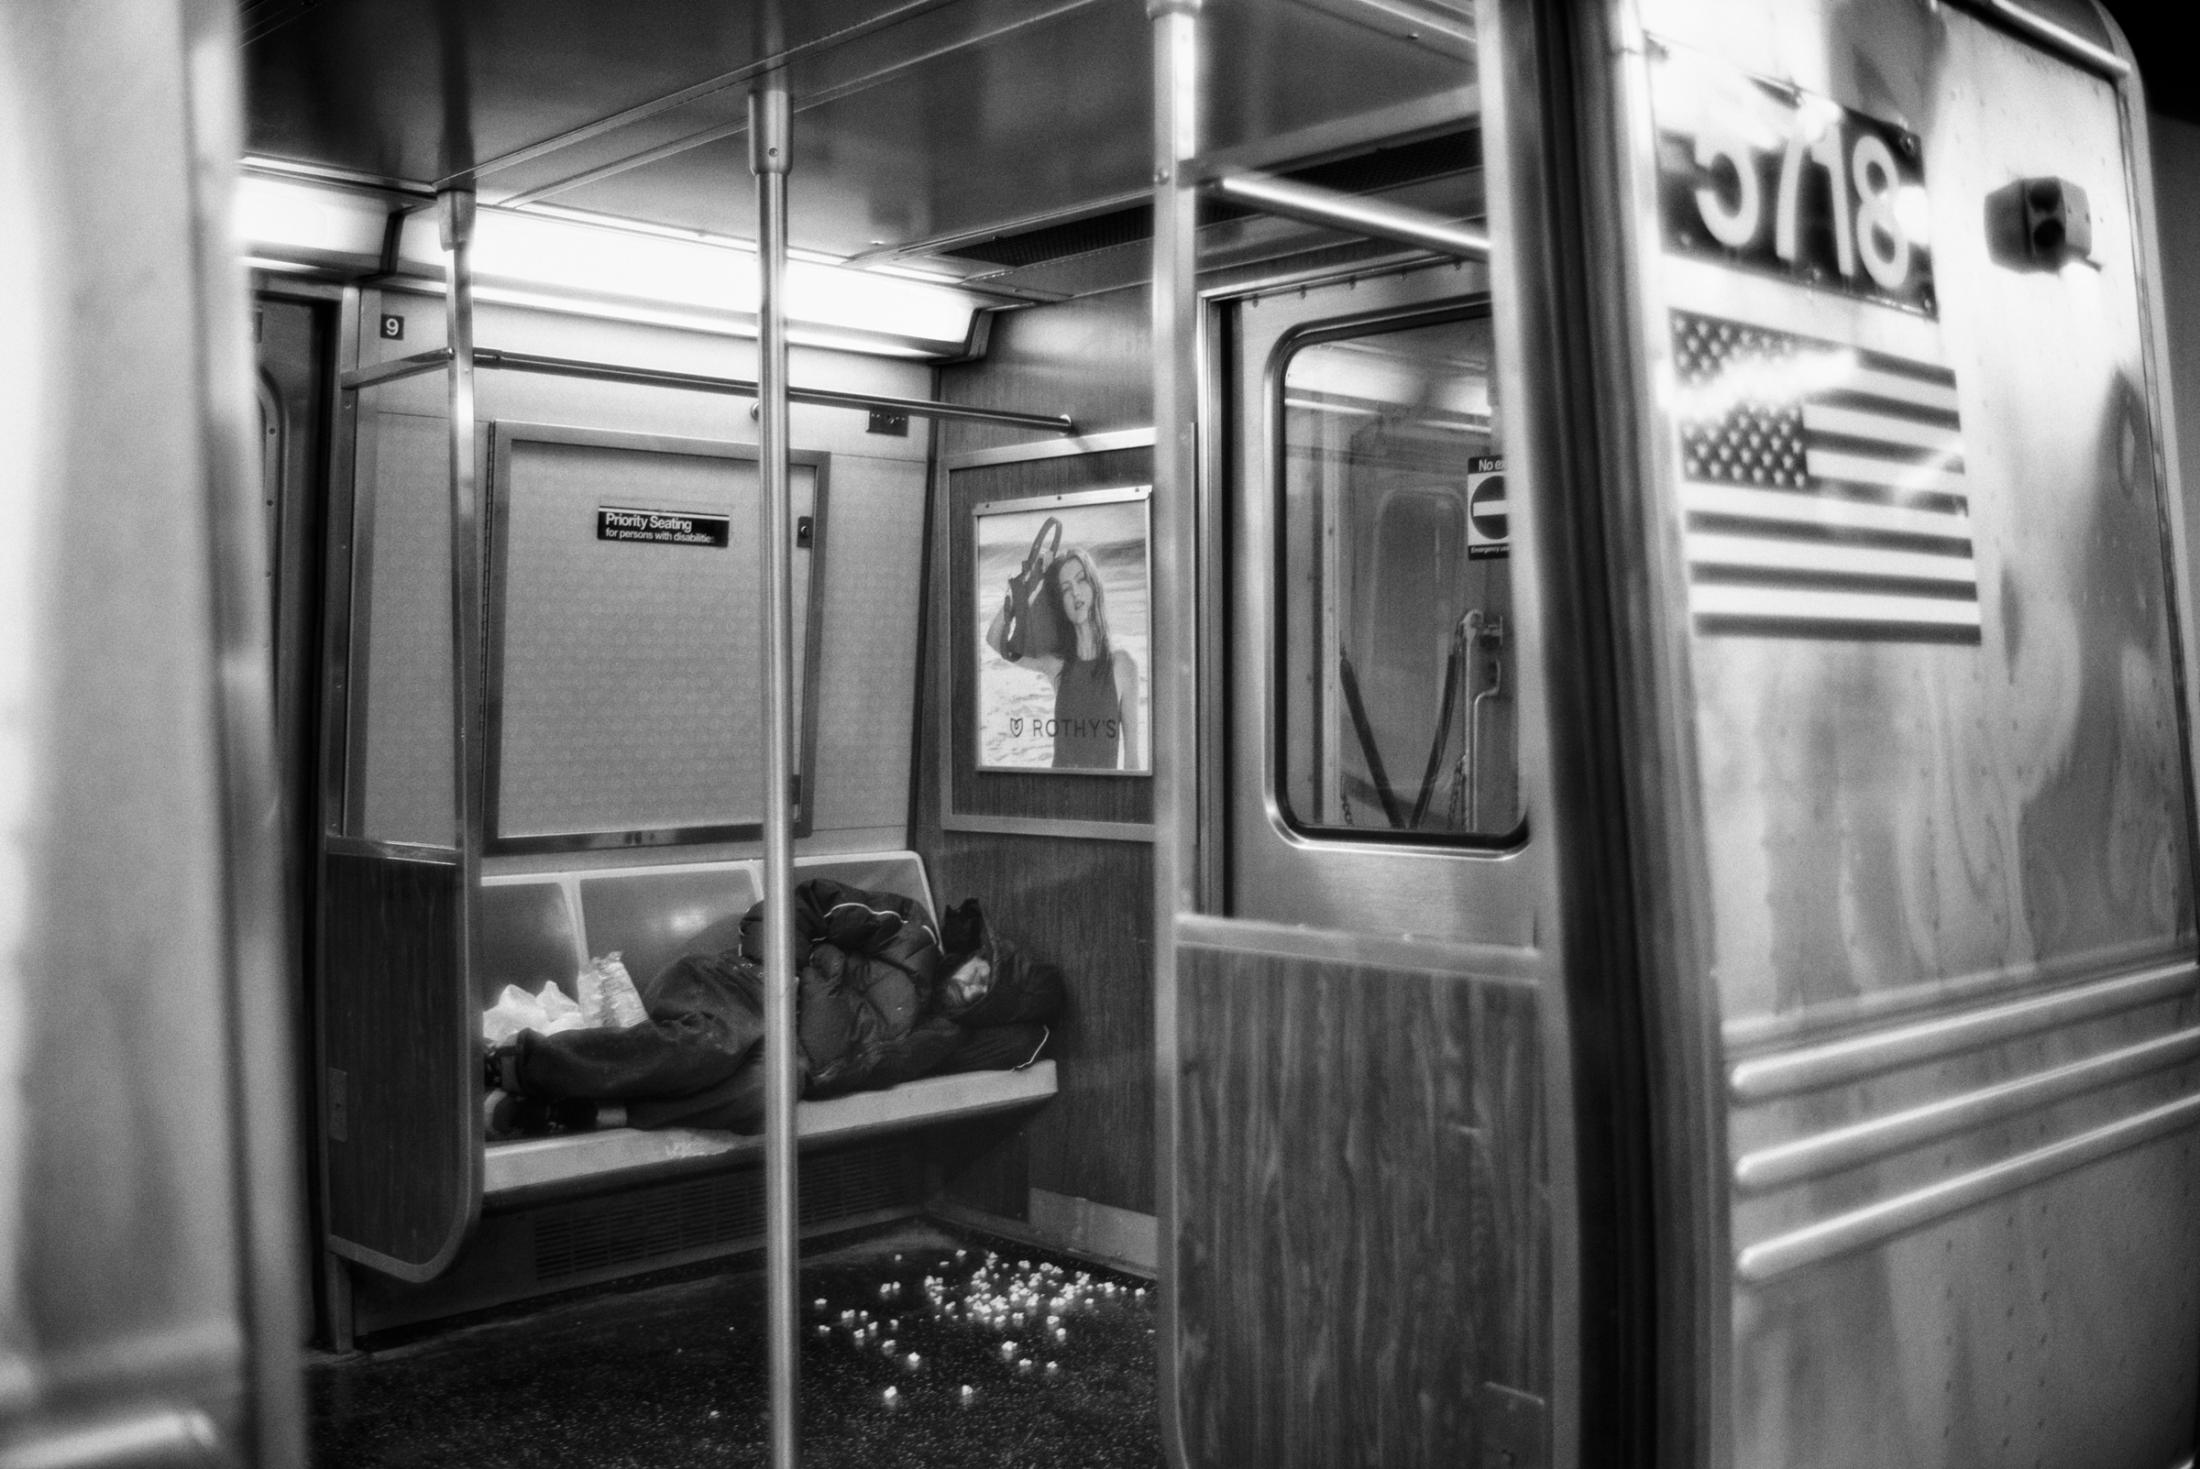 Dire Silence: NYC in Pandemic -  42nd St. subway station, New York. Apr. 11, 2020. 